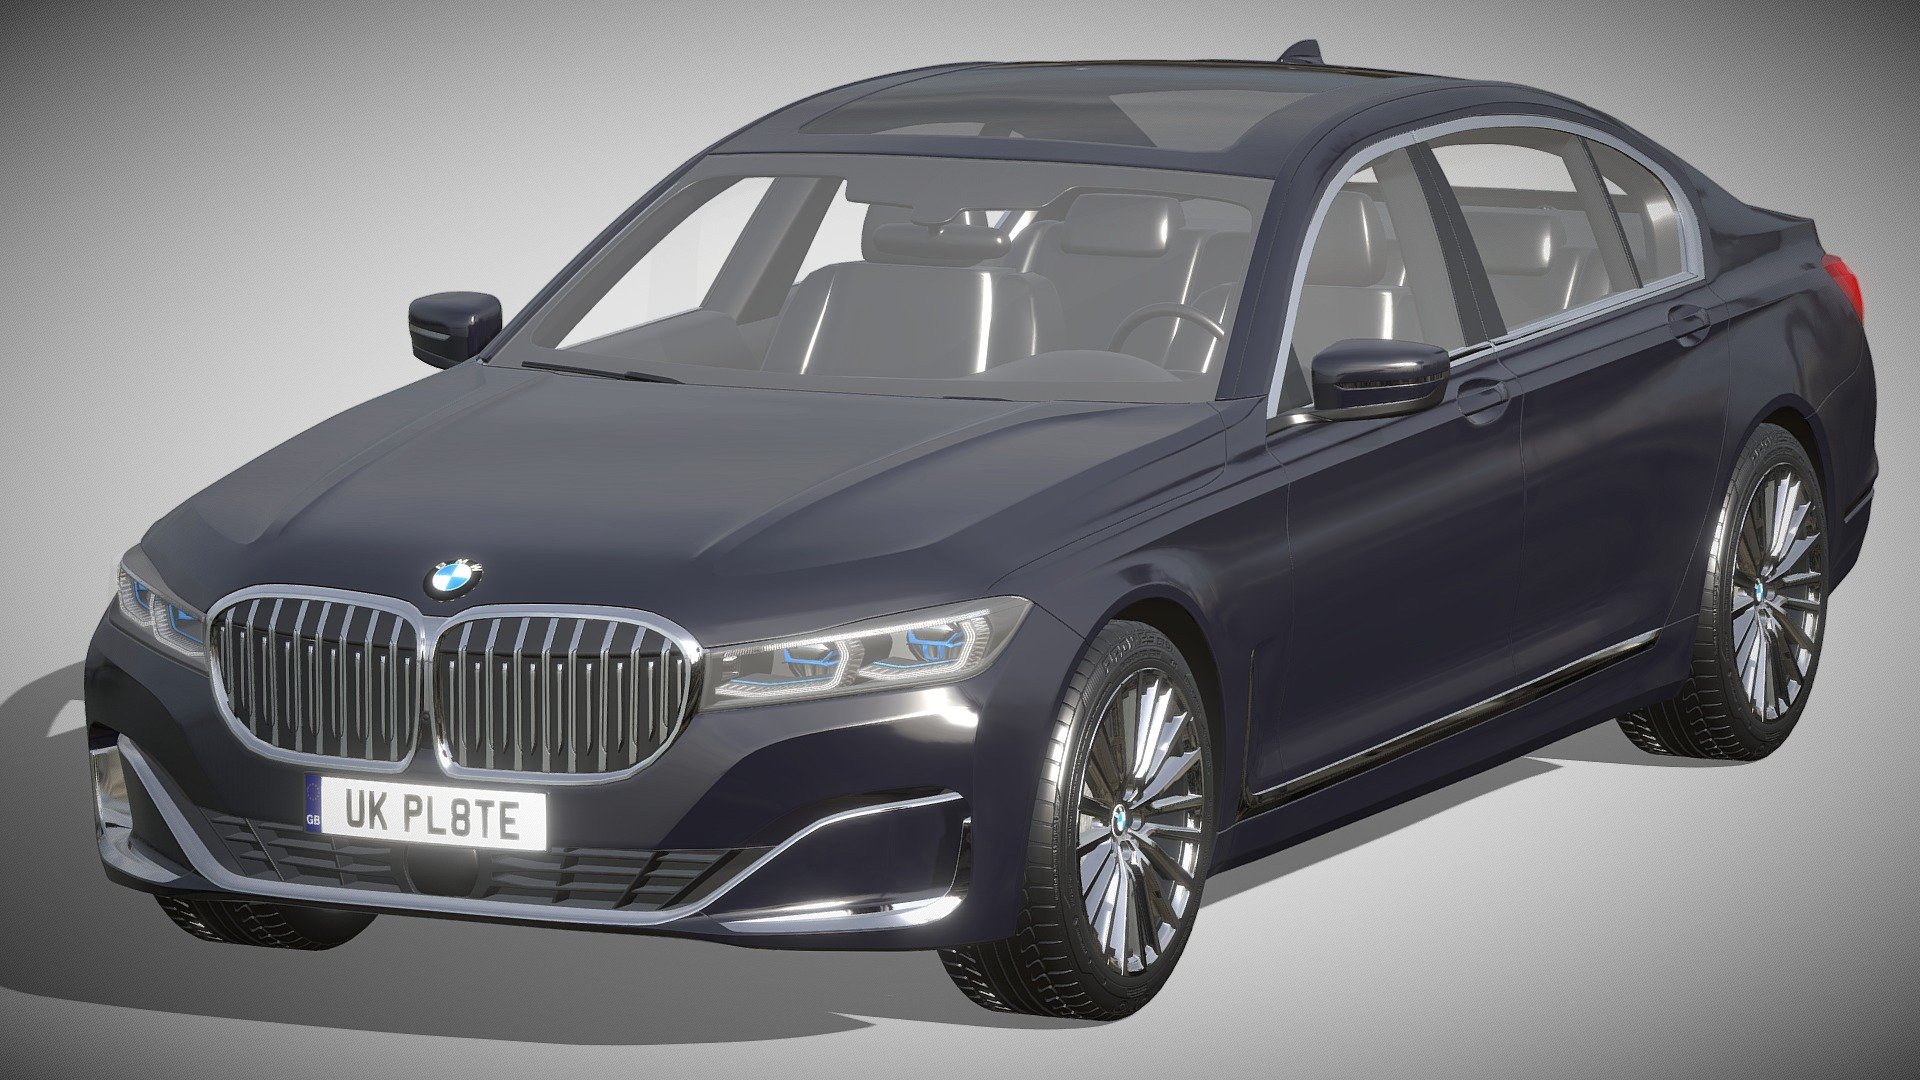 BMW 750Li

https://www.bmw.ru/ru/all-models/7-series/sedan/2019/bmw-7-series-sedan-inspire.html

Clean geometry Light weight model, yet completely detailed for HI-Res renders. Use for movies, Advertisements or games

Corona render and materials

All textures include in *.rar files

Lighting setup is not included in the file! - Bmw 750LI - Buy Royalty Free 3D model by zifir3d 3d model